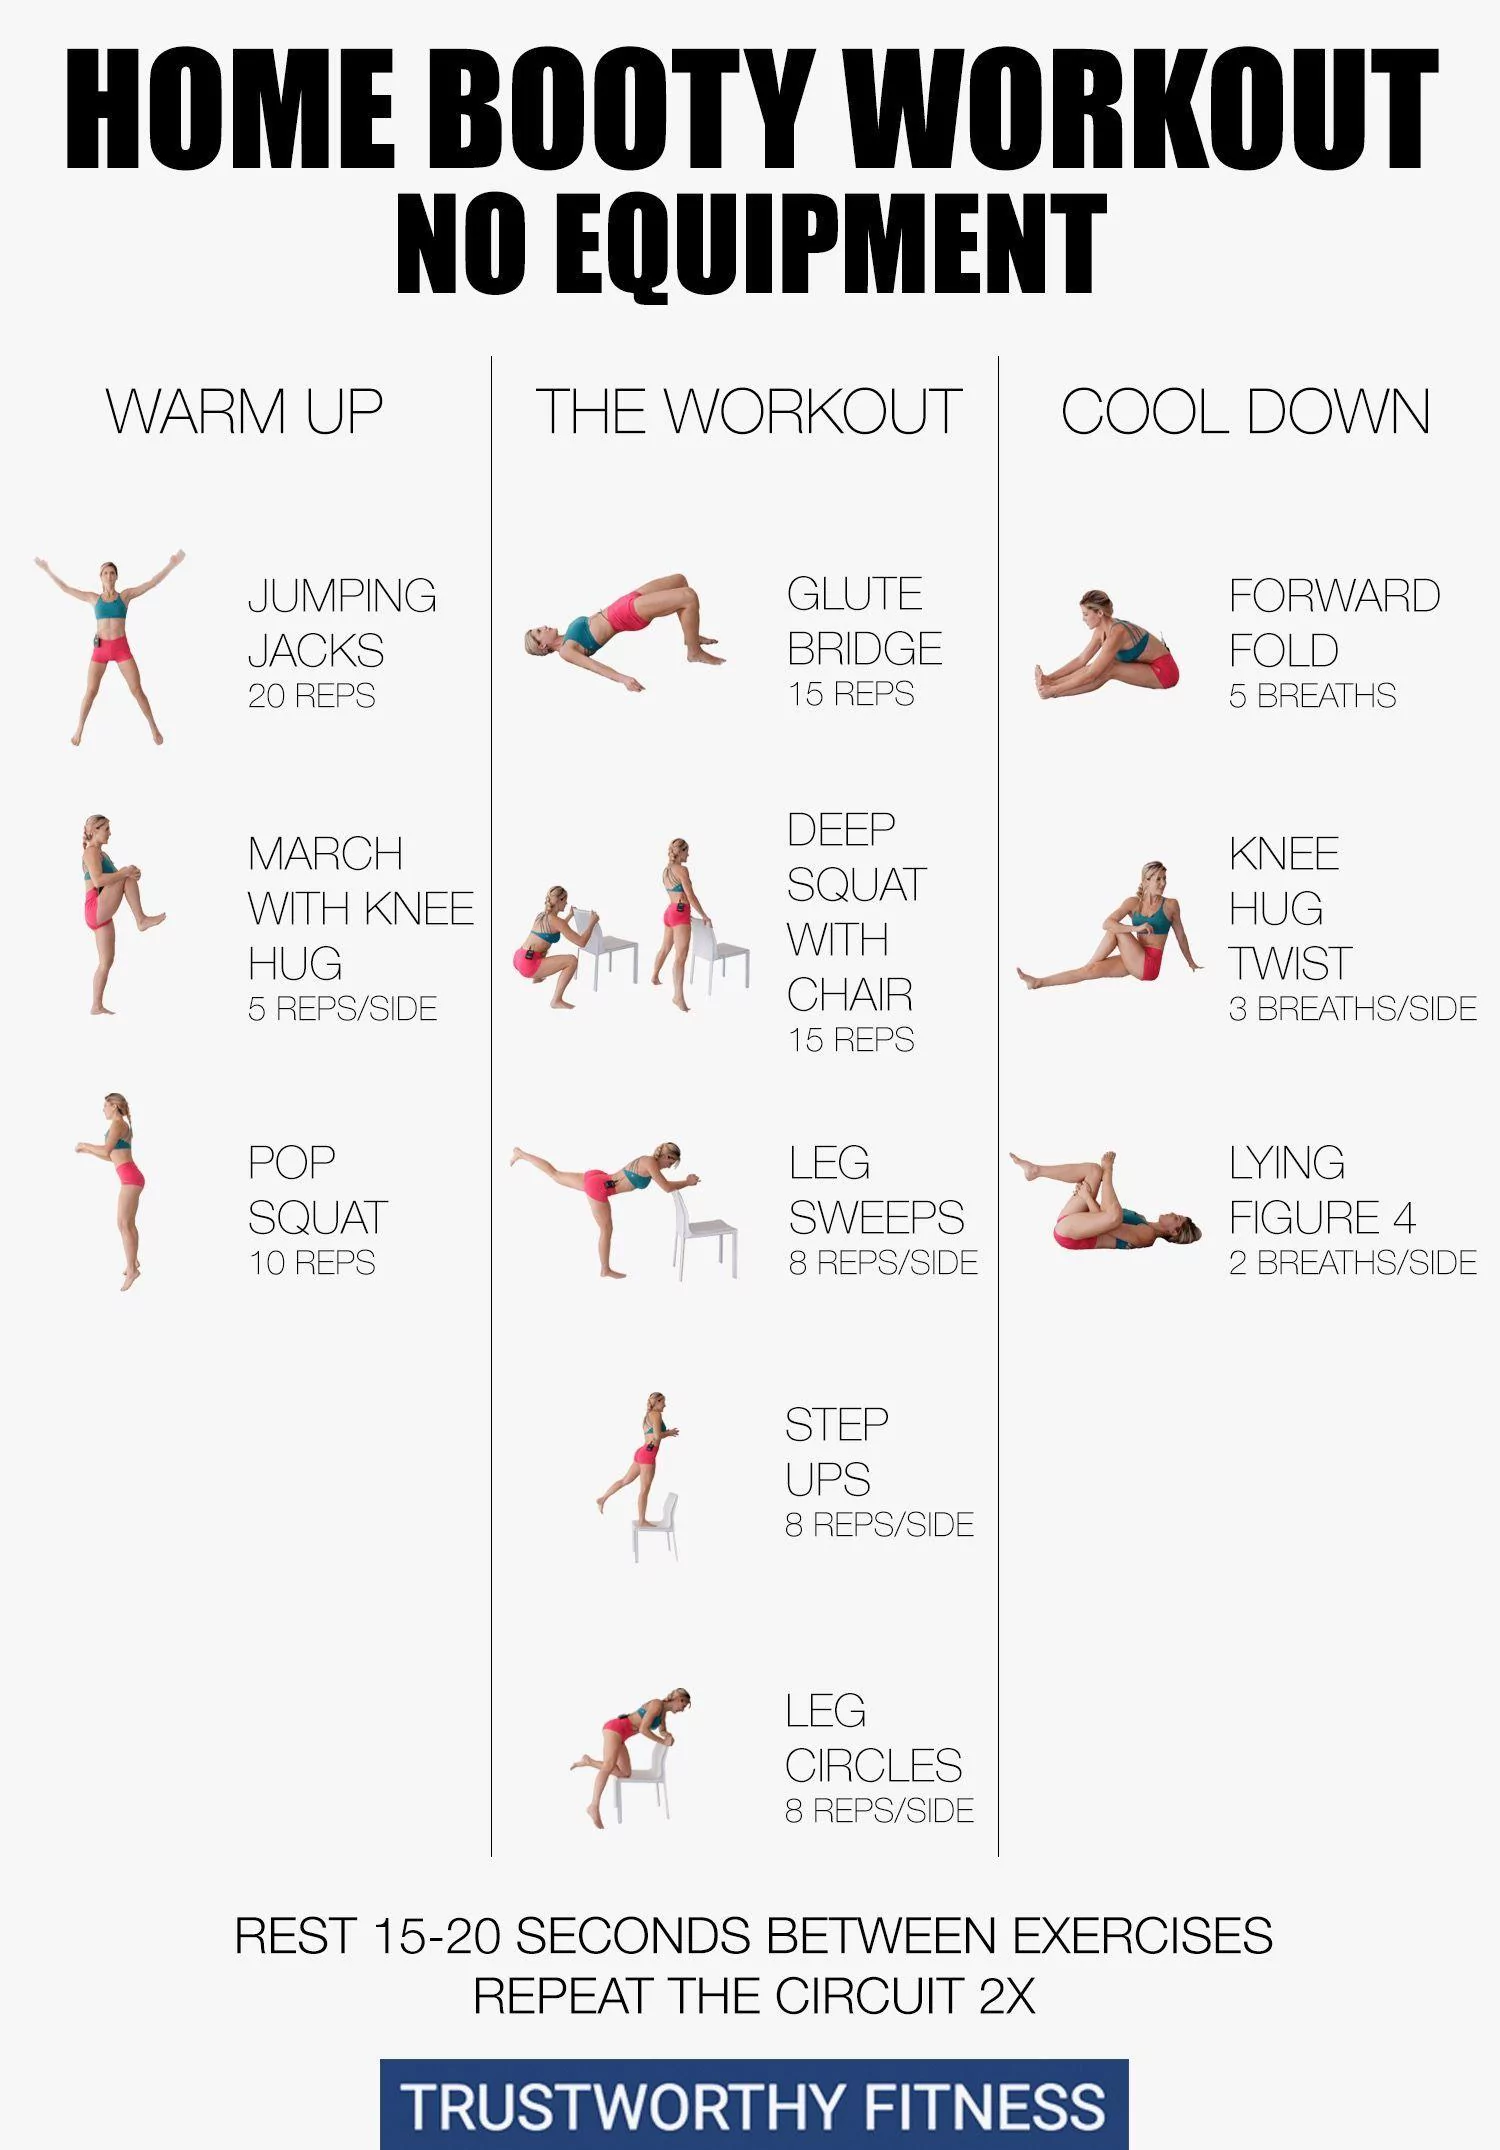 Home Booty Workout No Equipment